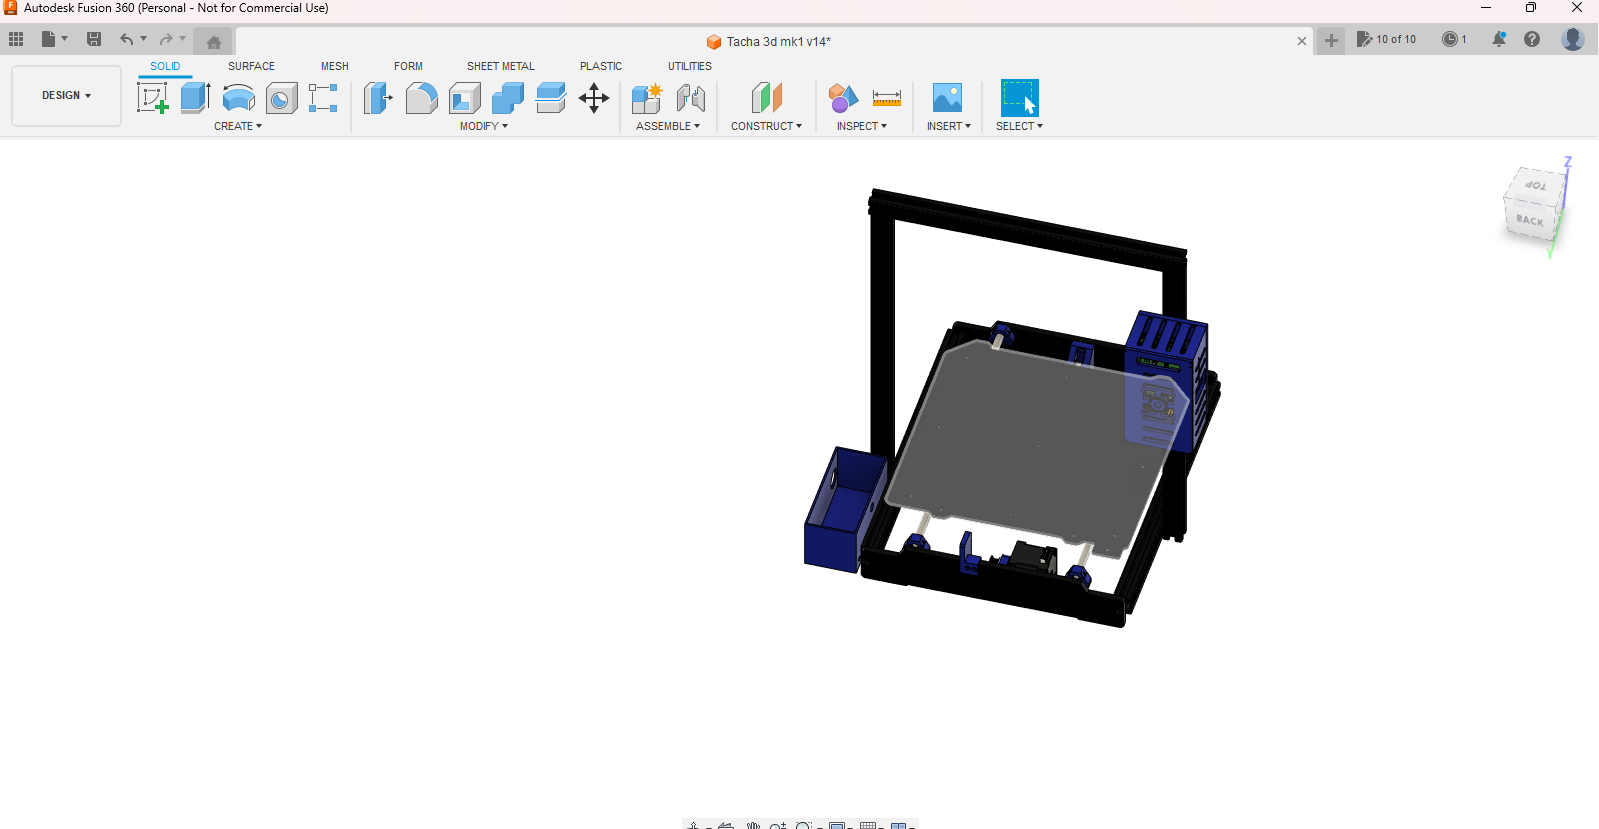 Autodesk Fusion 360 (Personal - Not for Commercial Use) 6_30_2023 9_35_35 PM.png